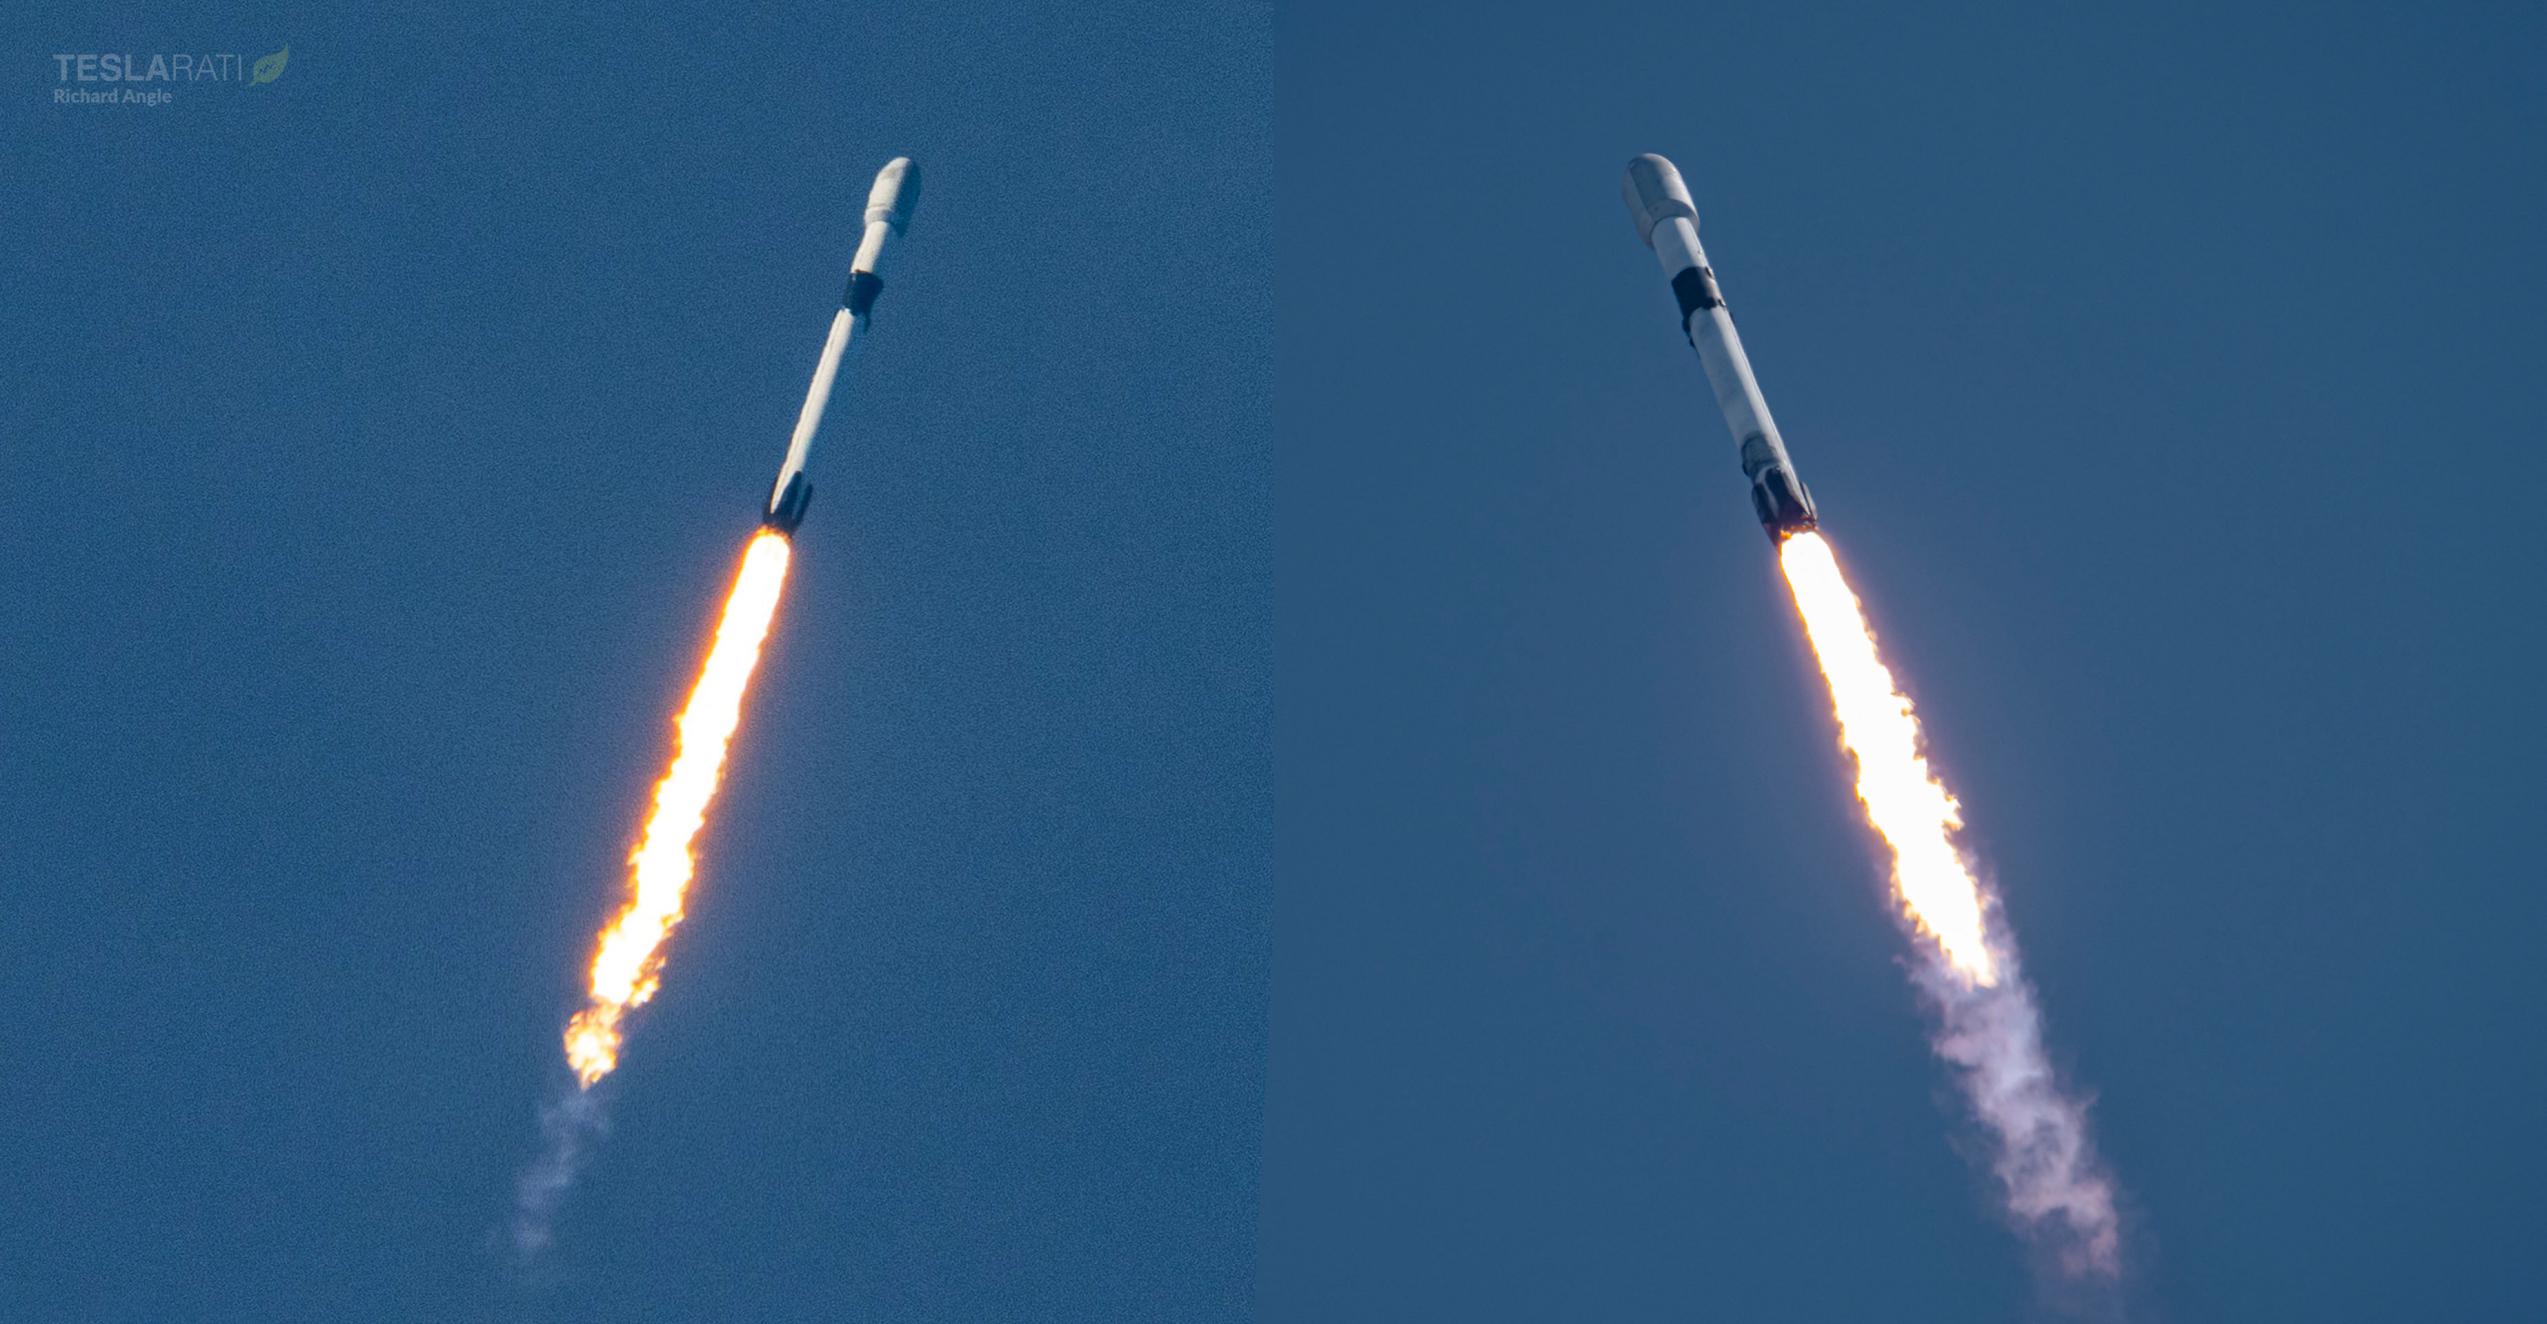 SpaceX launches two Starlink missions in 24 hours